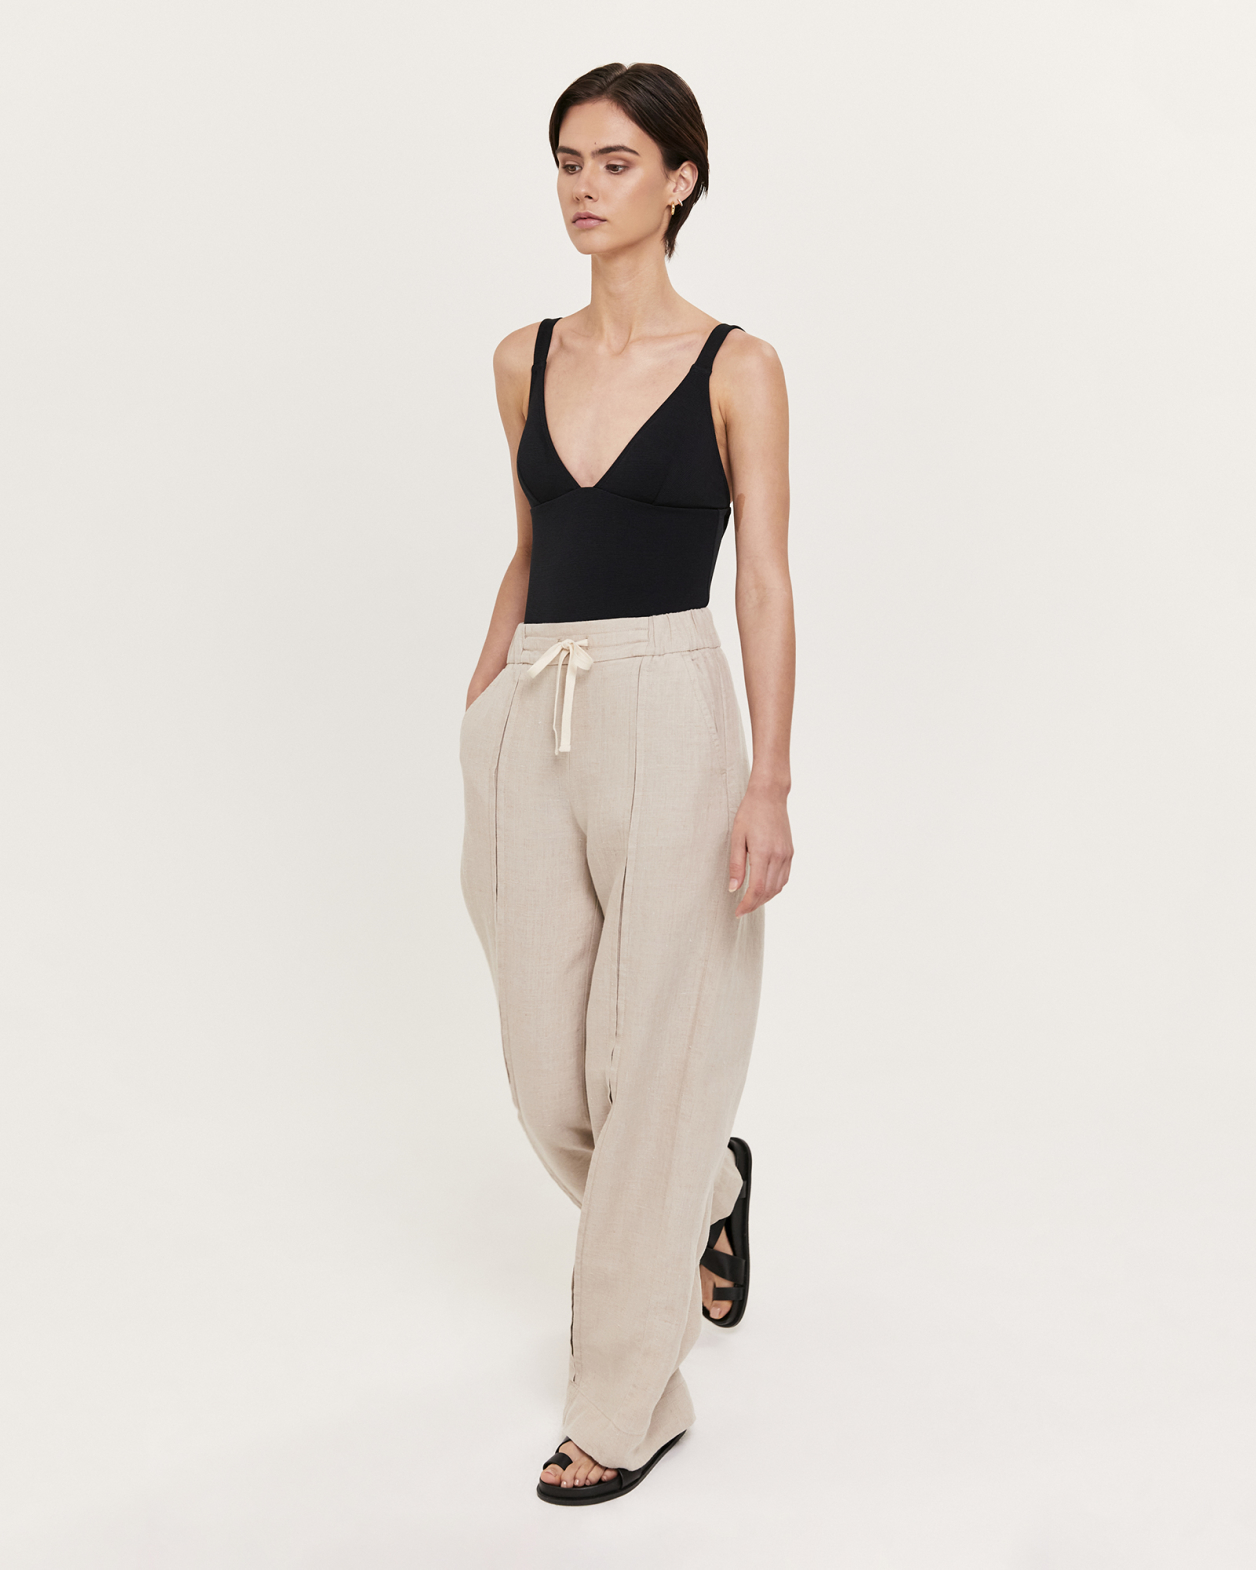 Lila Linen Detailed Pant in OATMEAL